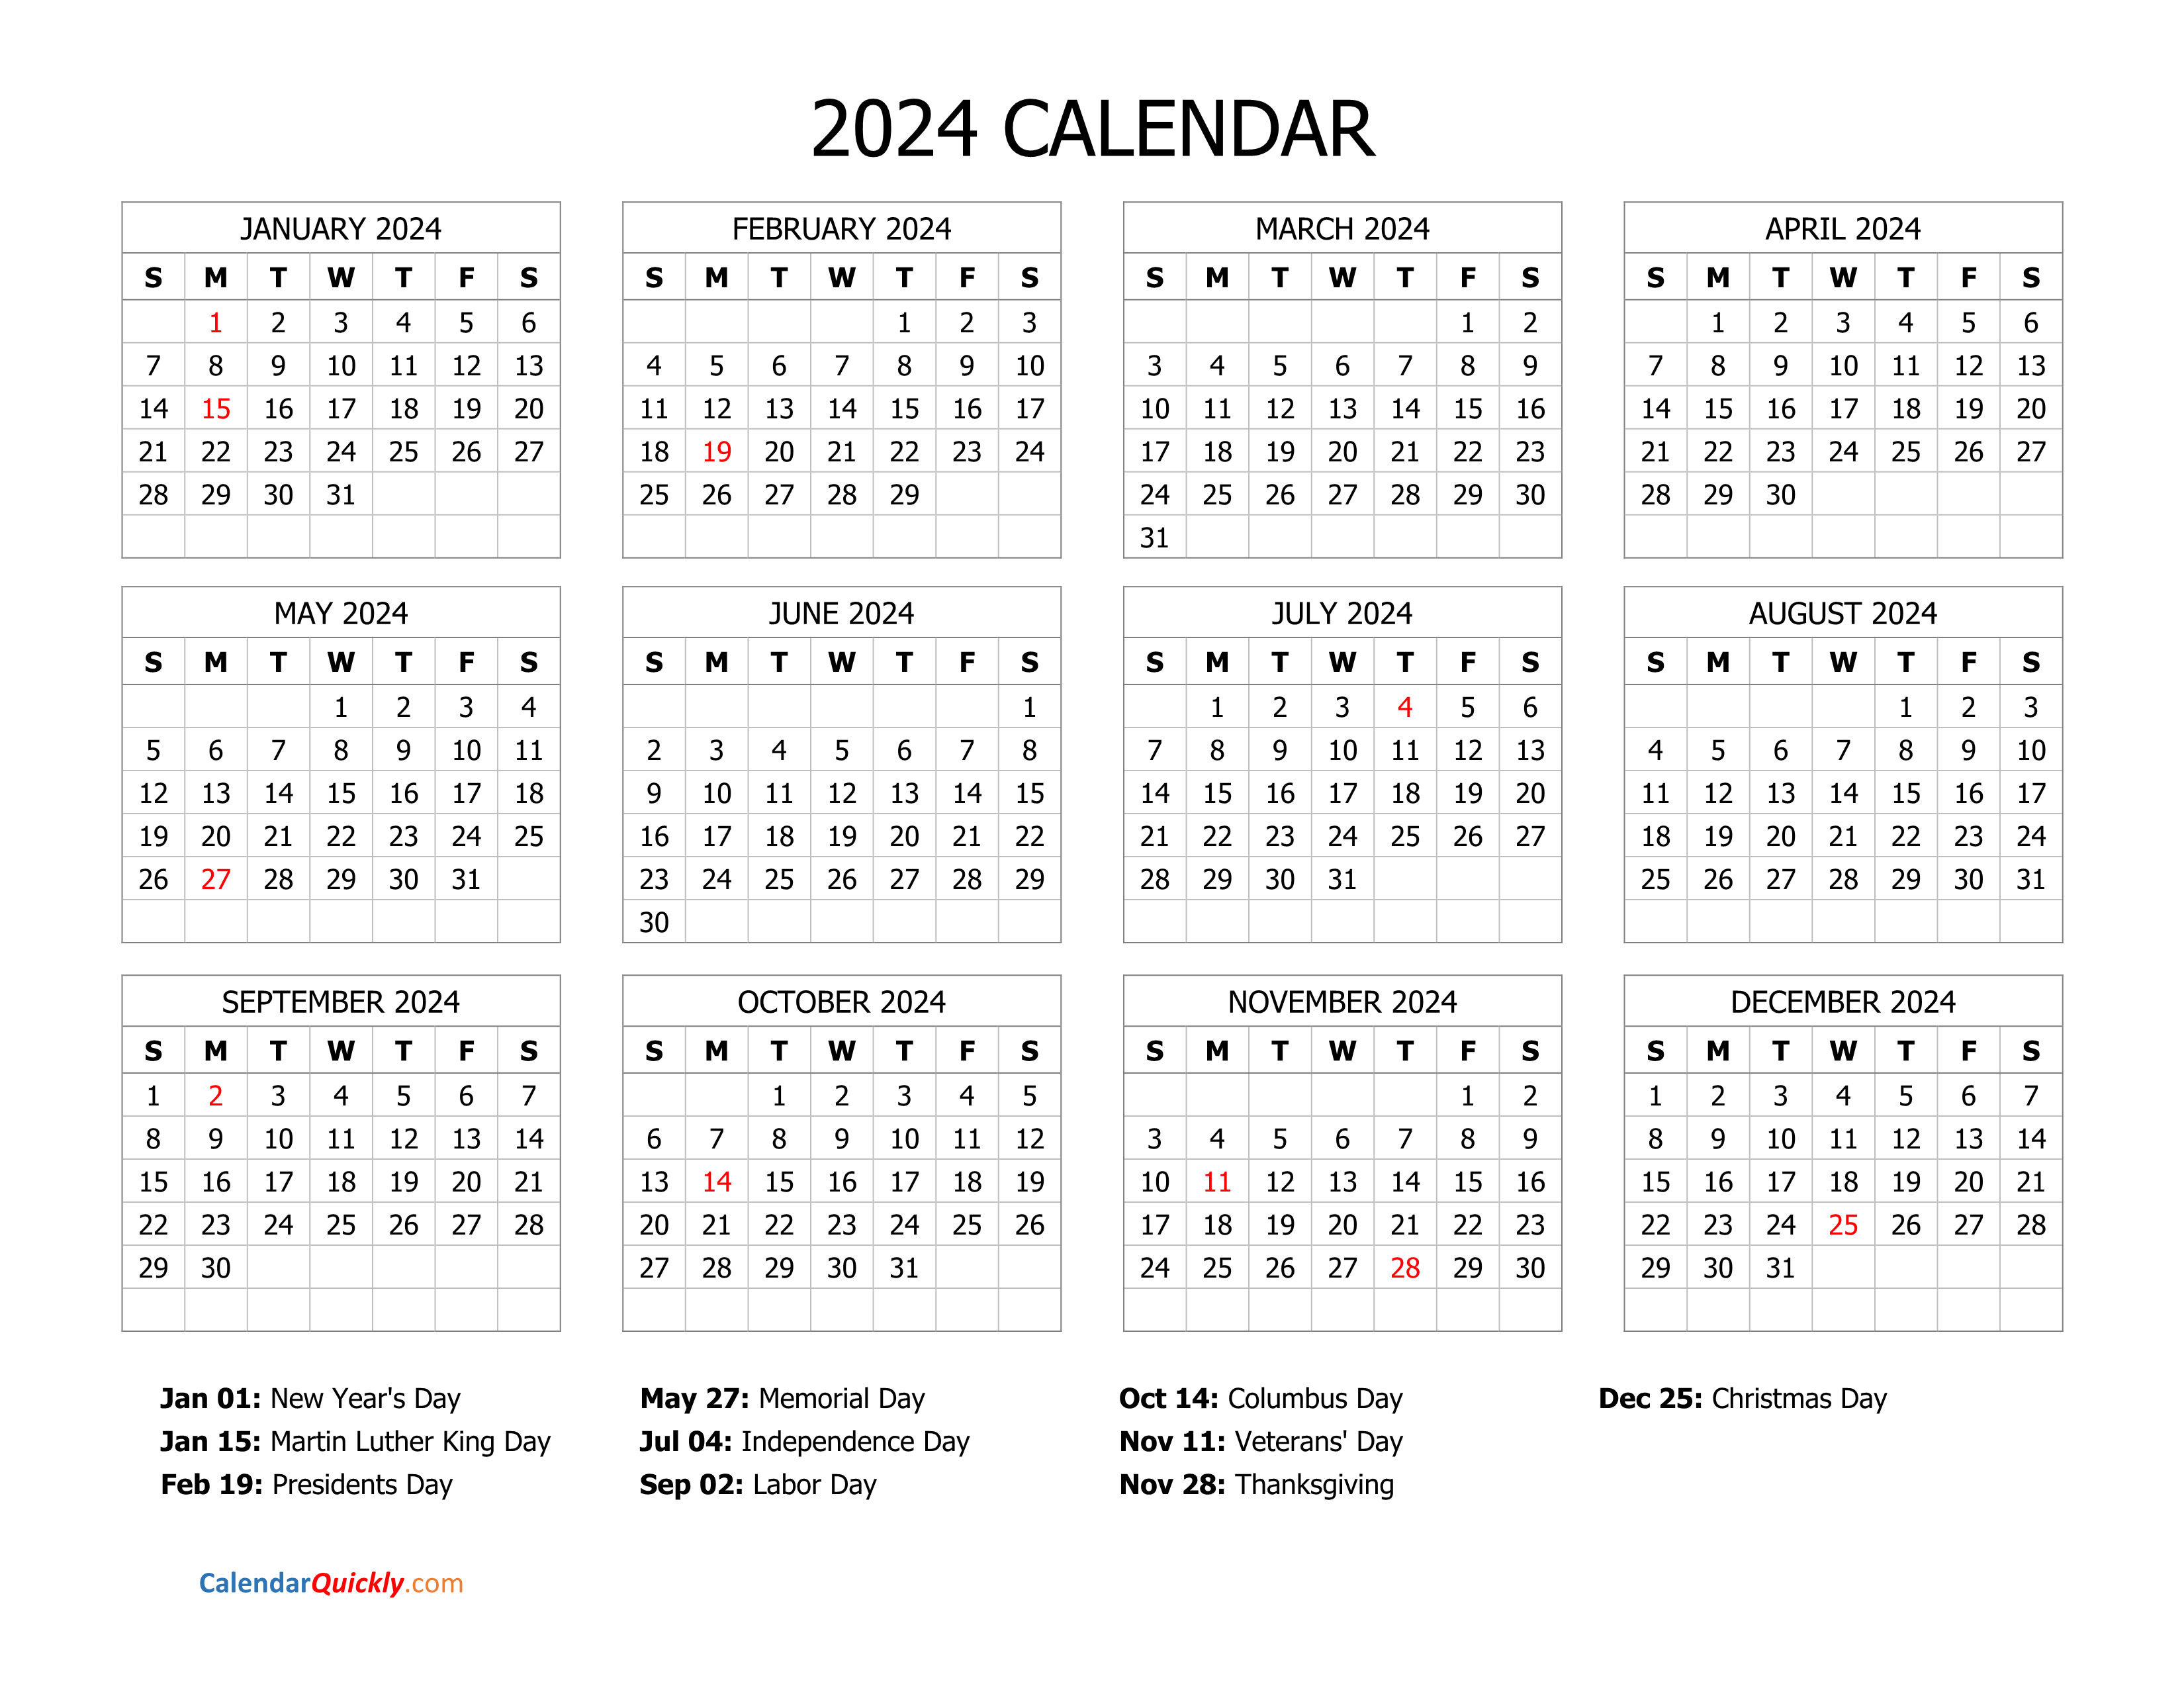 2024 Calendar Free Printable - Free Printable 2024 Calendar With Holidays Excel